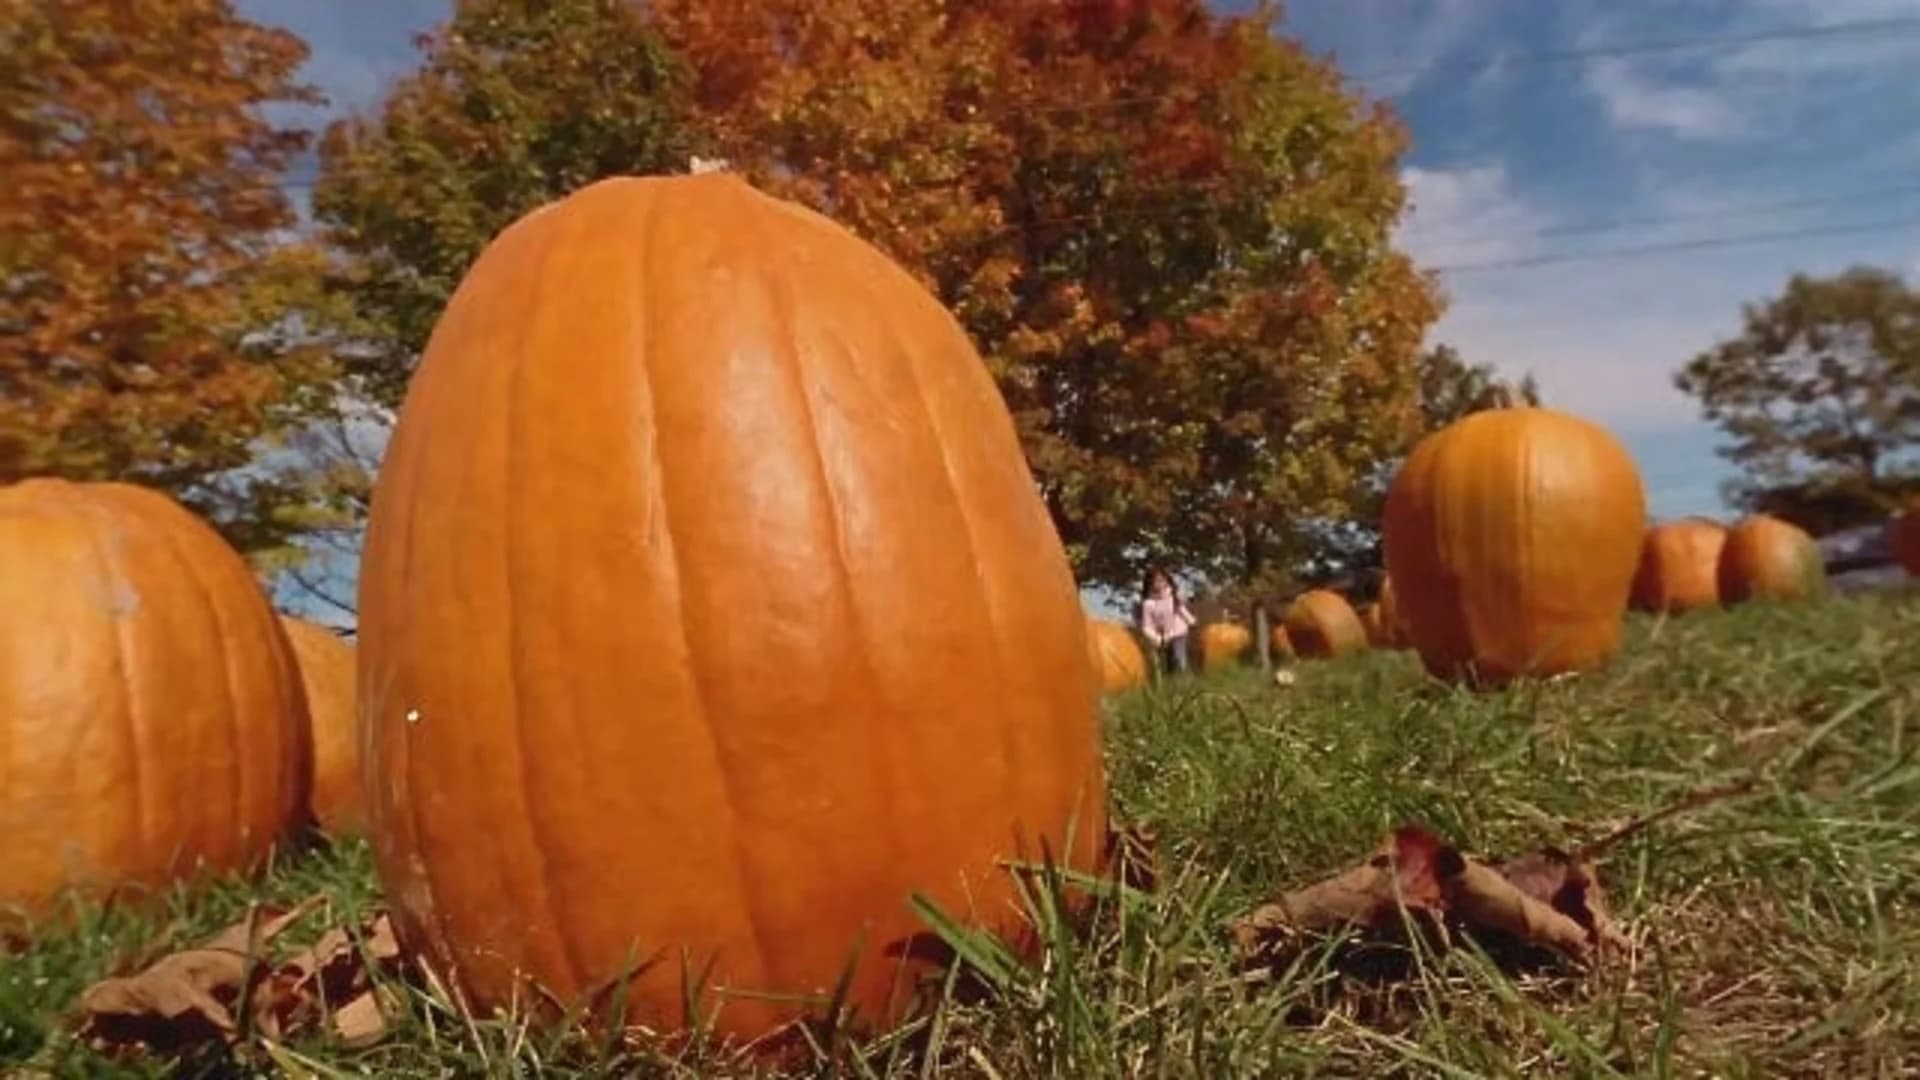 Pumpkins aren't just for Jack-o-lanterns and pies